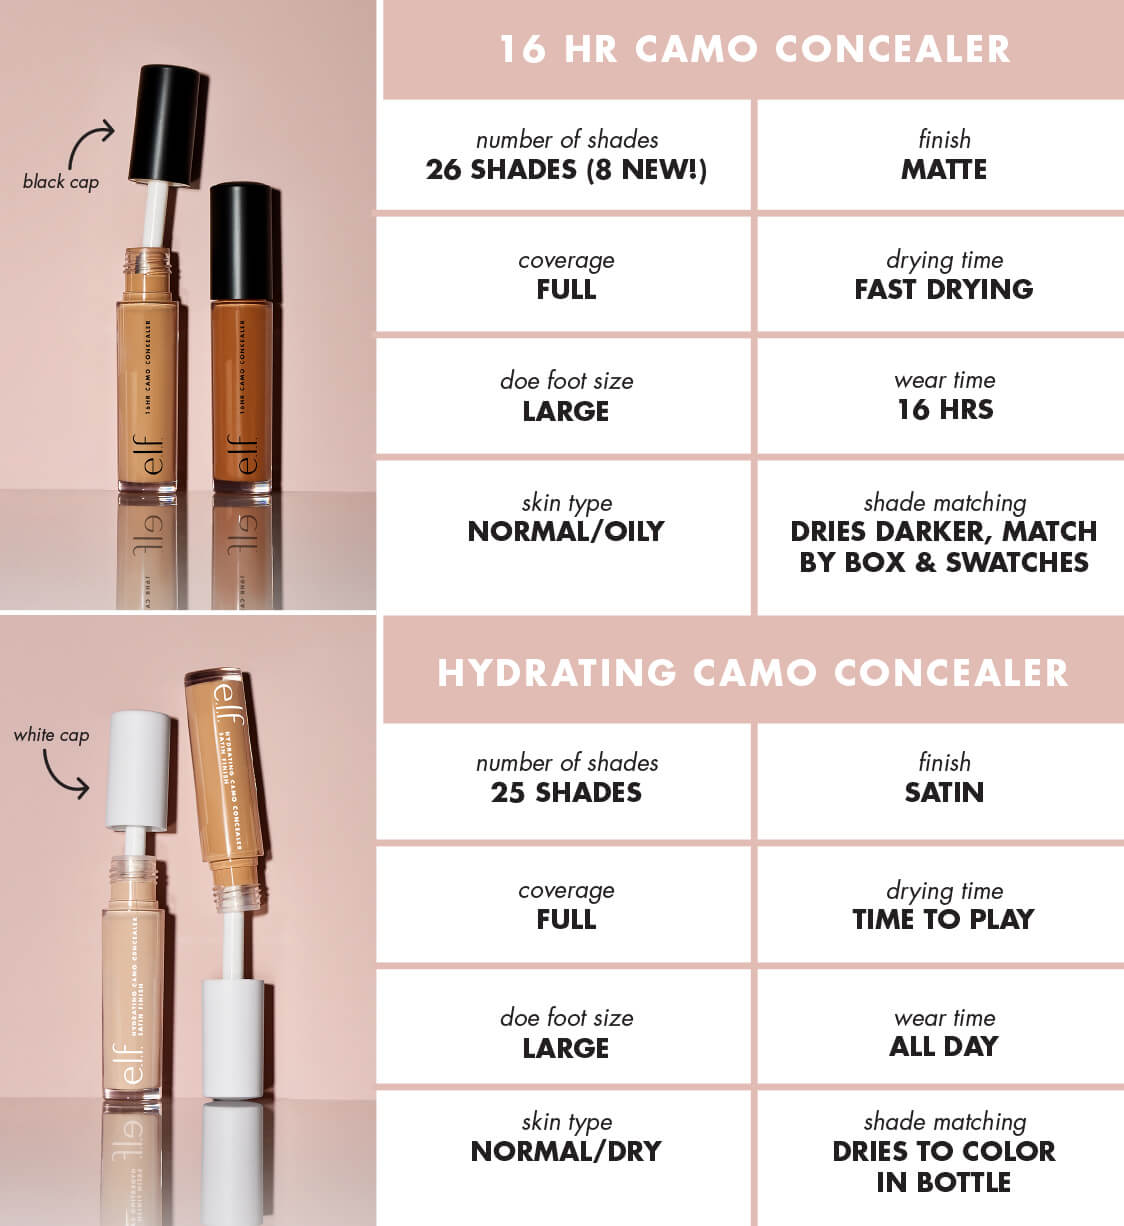 Comparison Chart of 16 HR Camo Concealer and Hydrating Camo Concealer